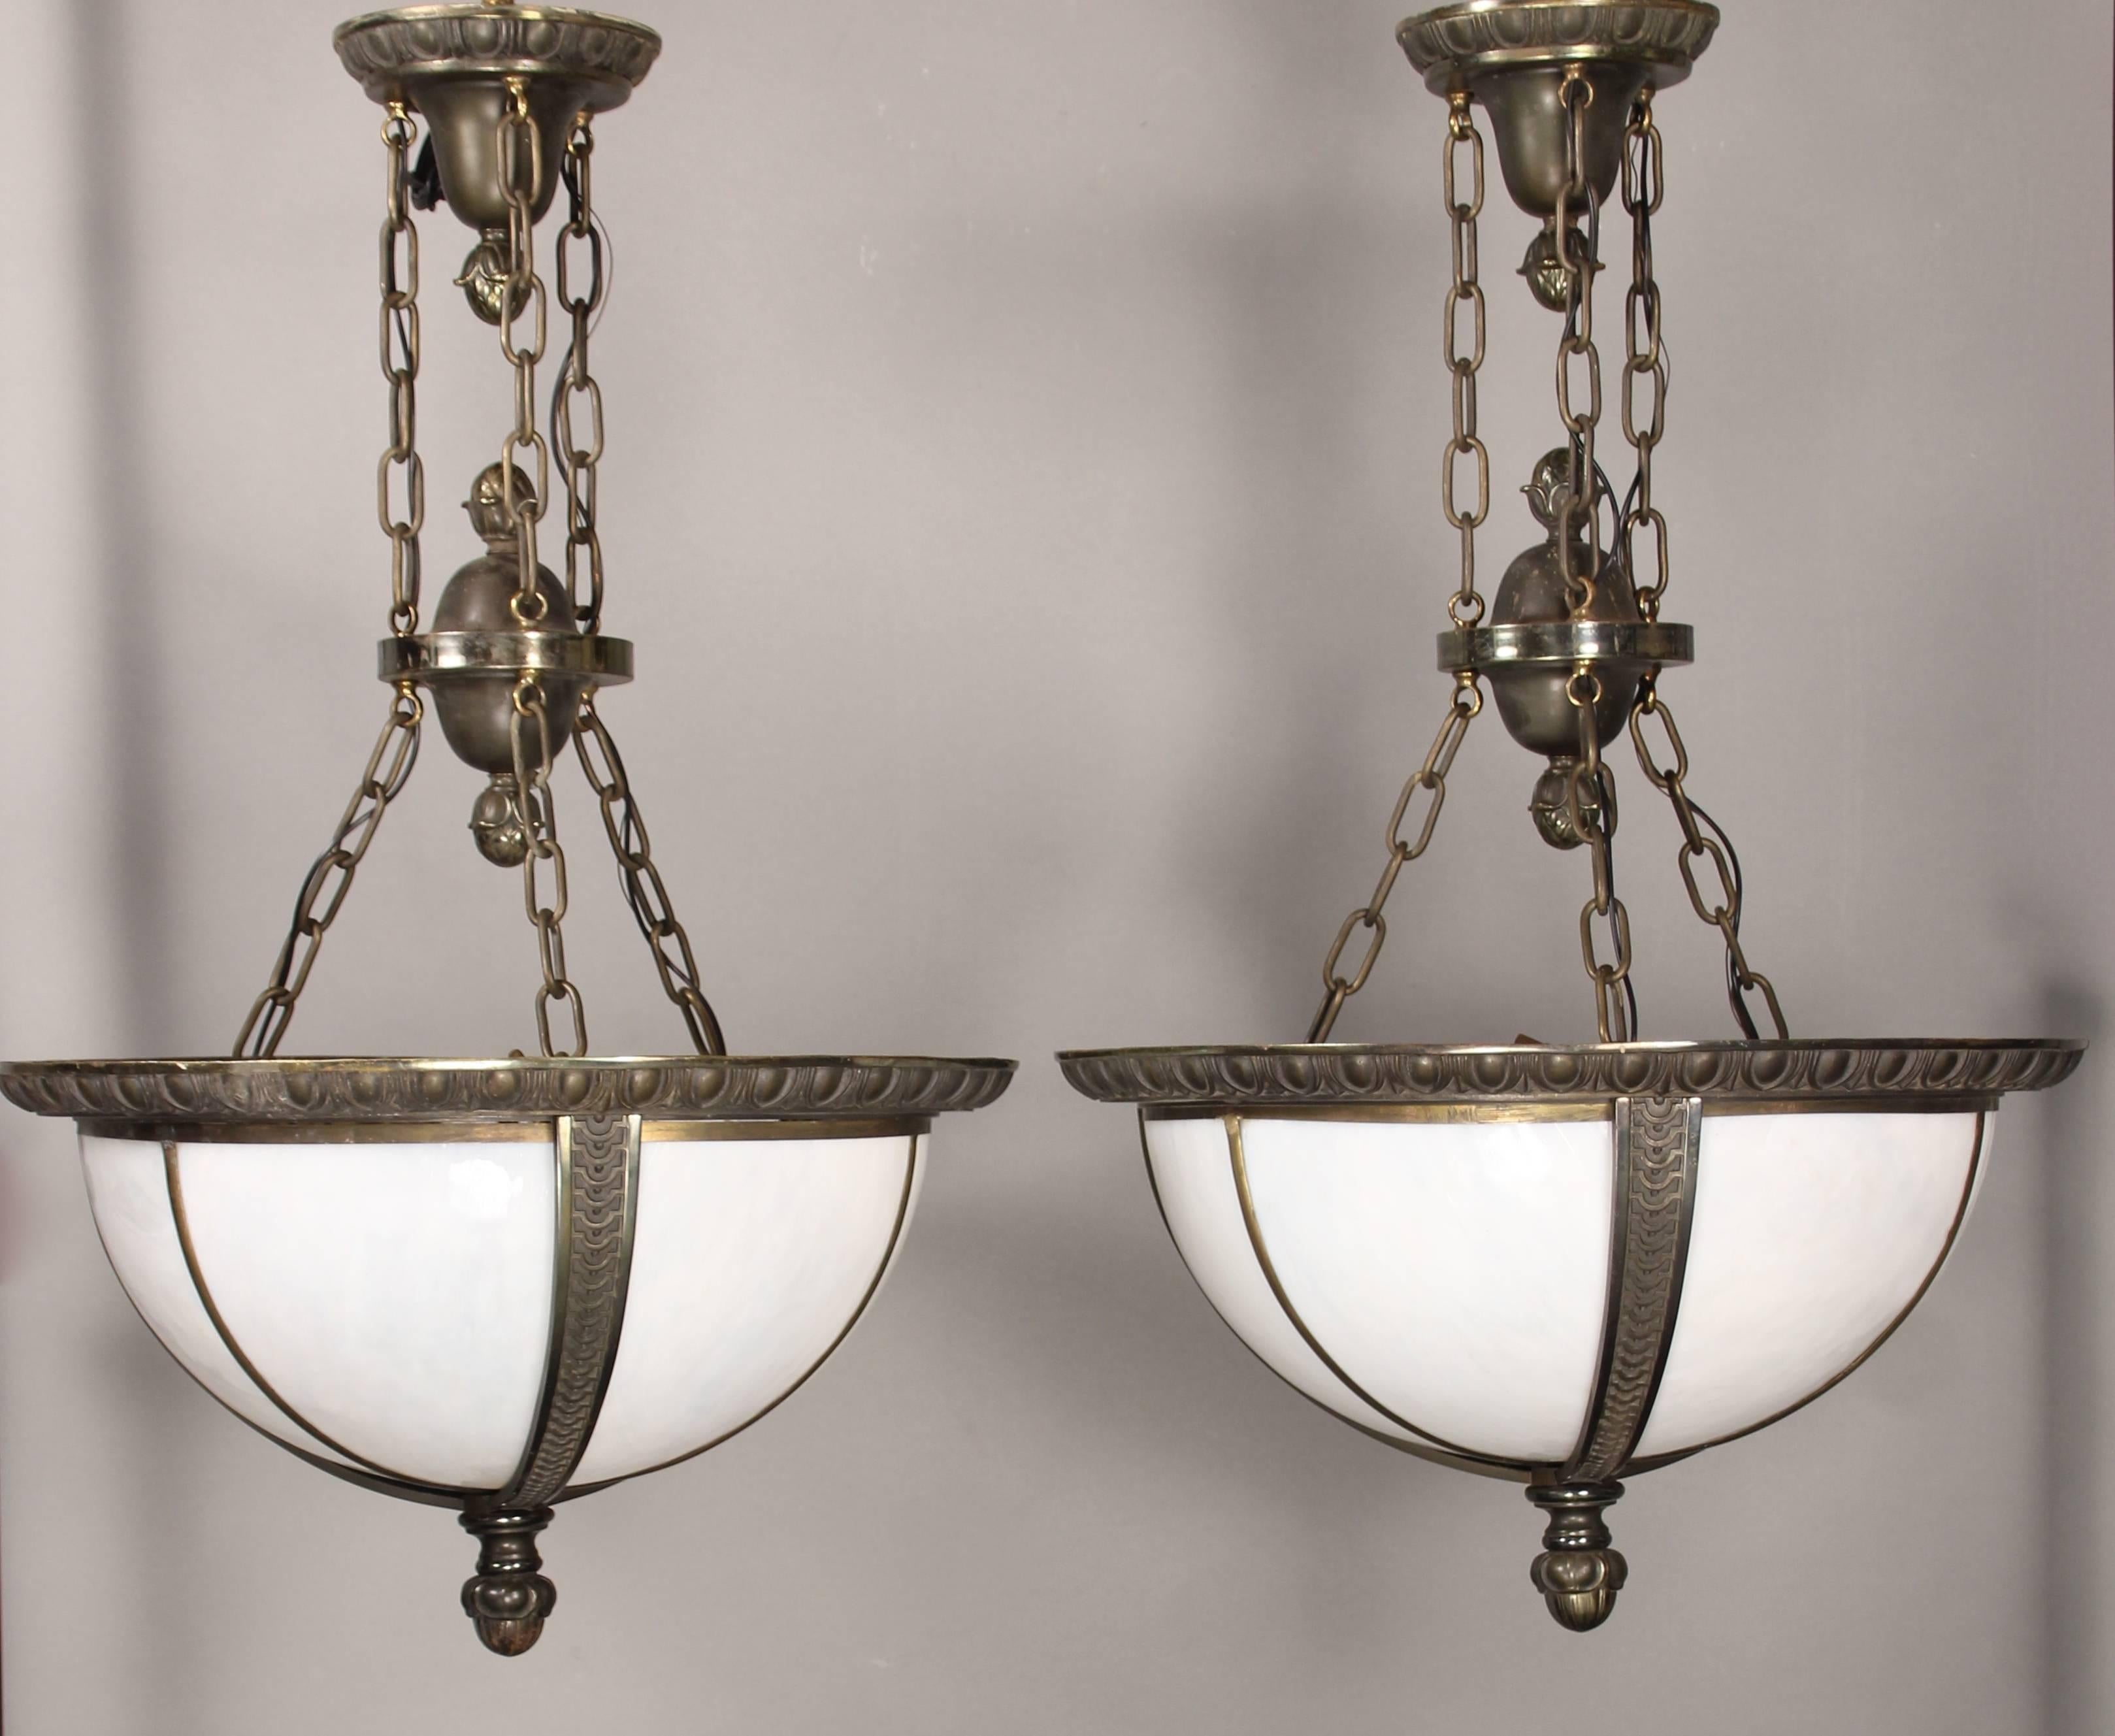 Priced and sold separately. Beautiful of 1920s pendant lights with original glass panels and crafted of finely cast bronze. Measures: 38